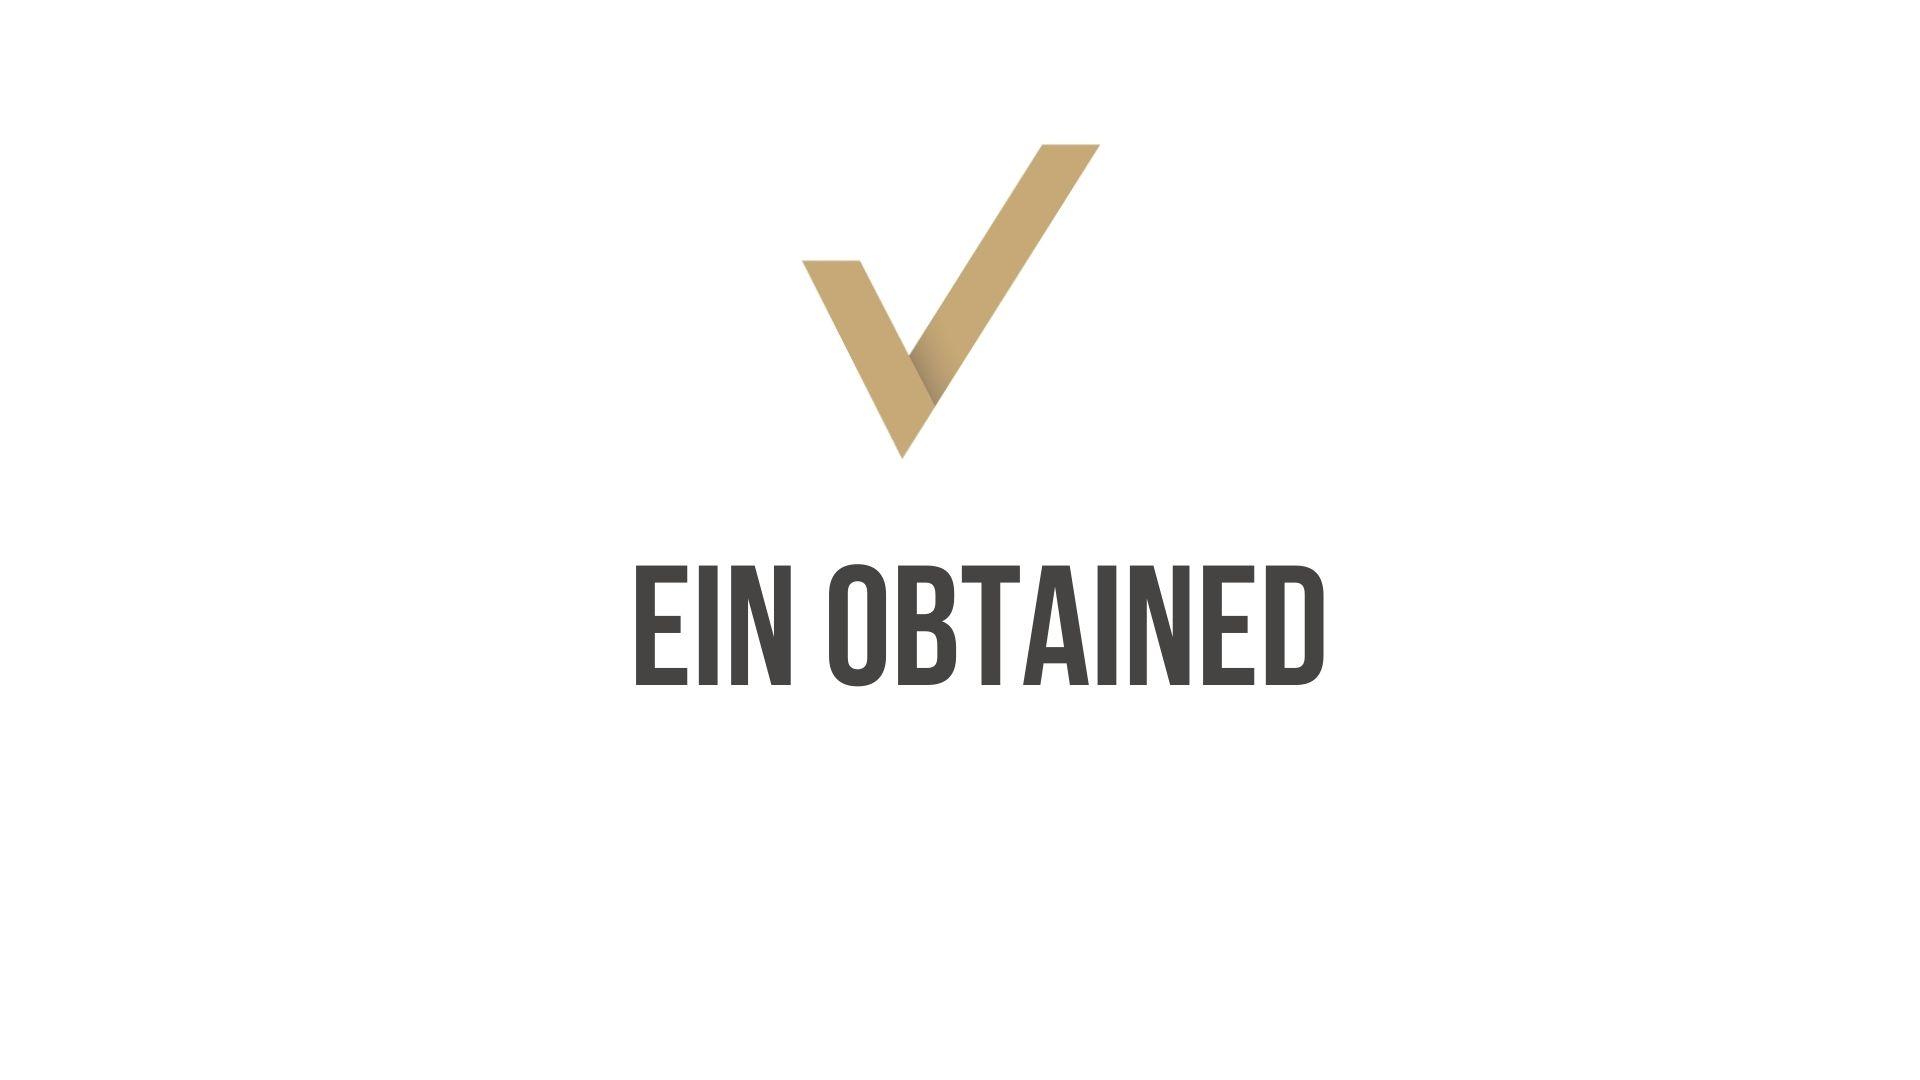 EIN Obtained for E-Commerce Business